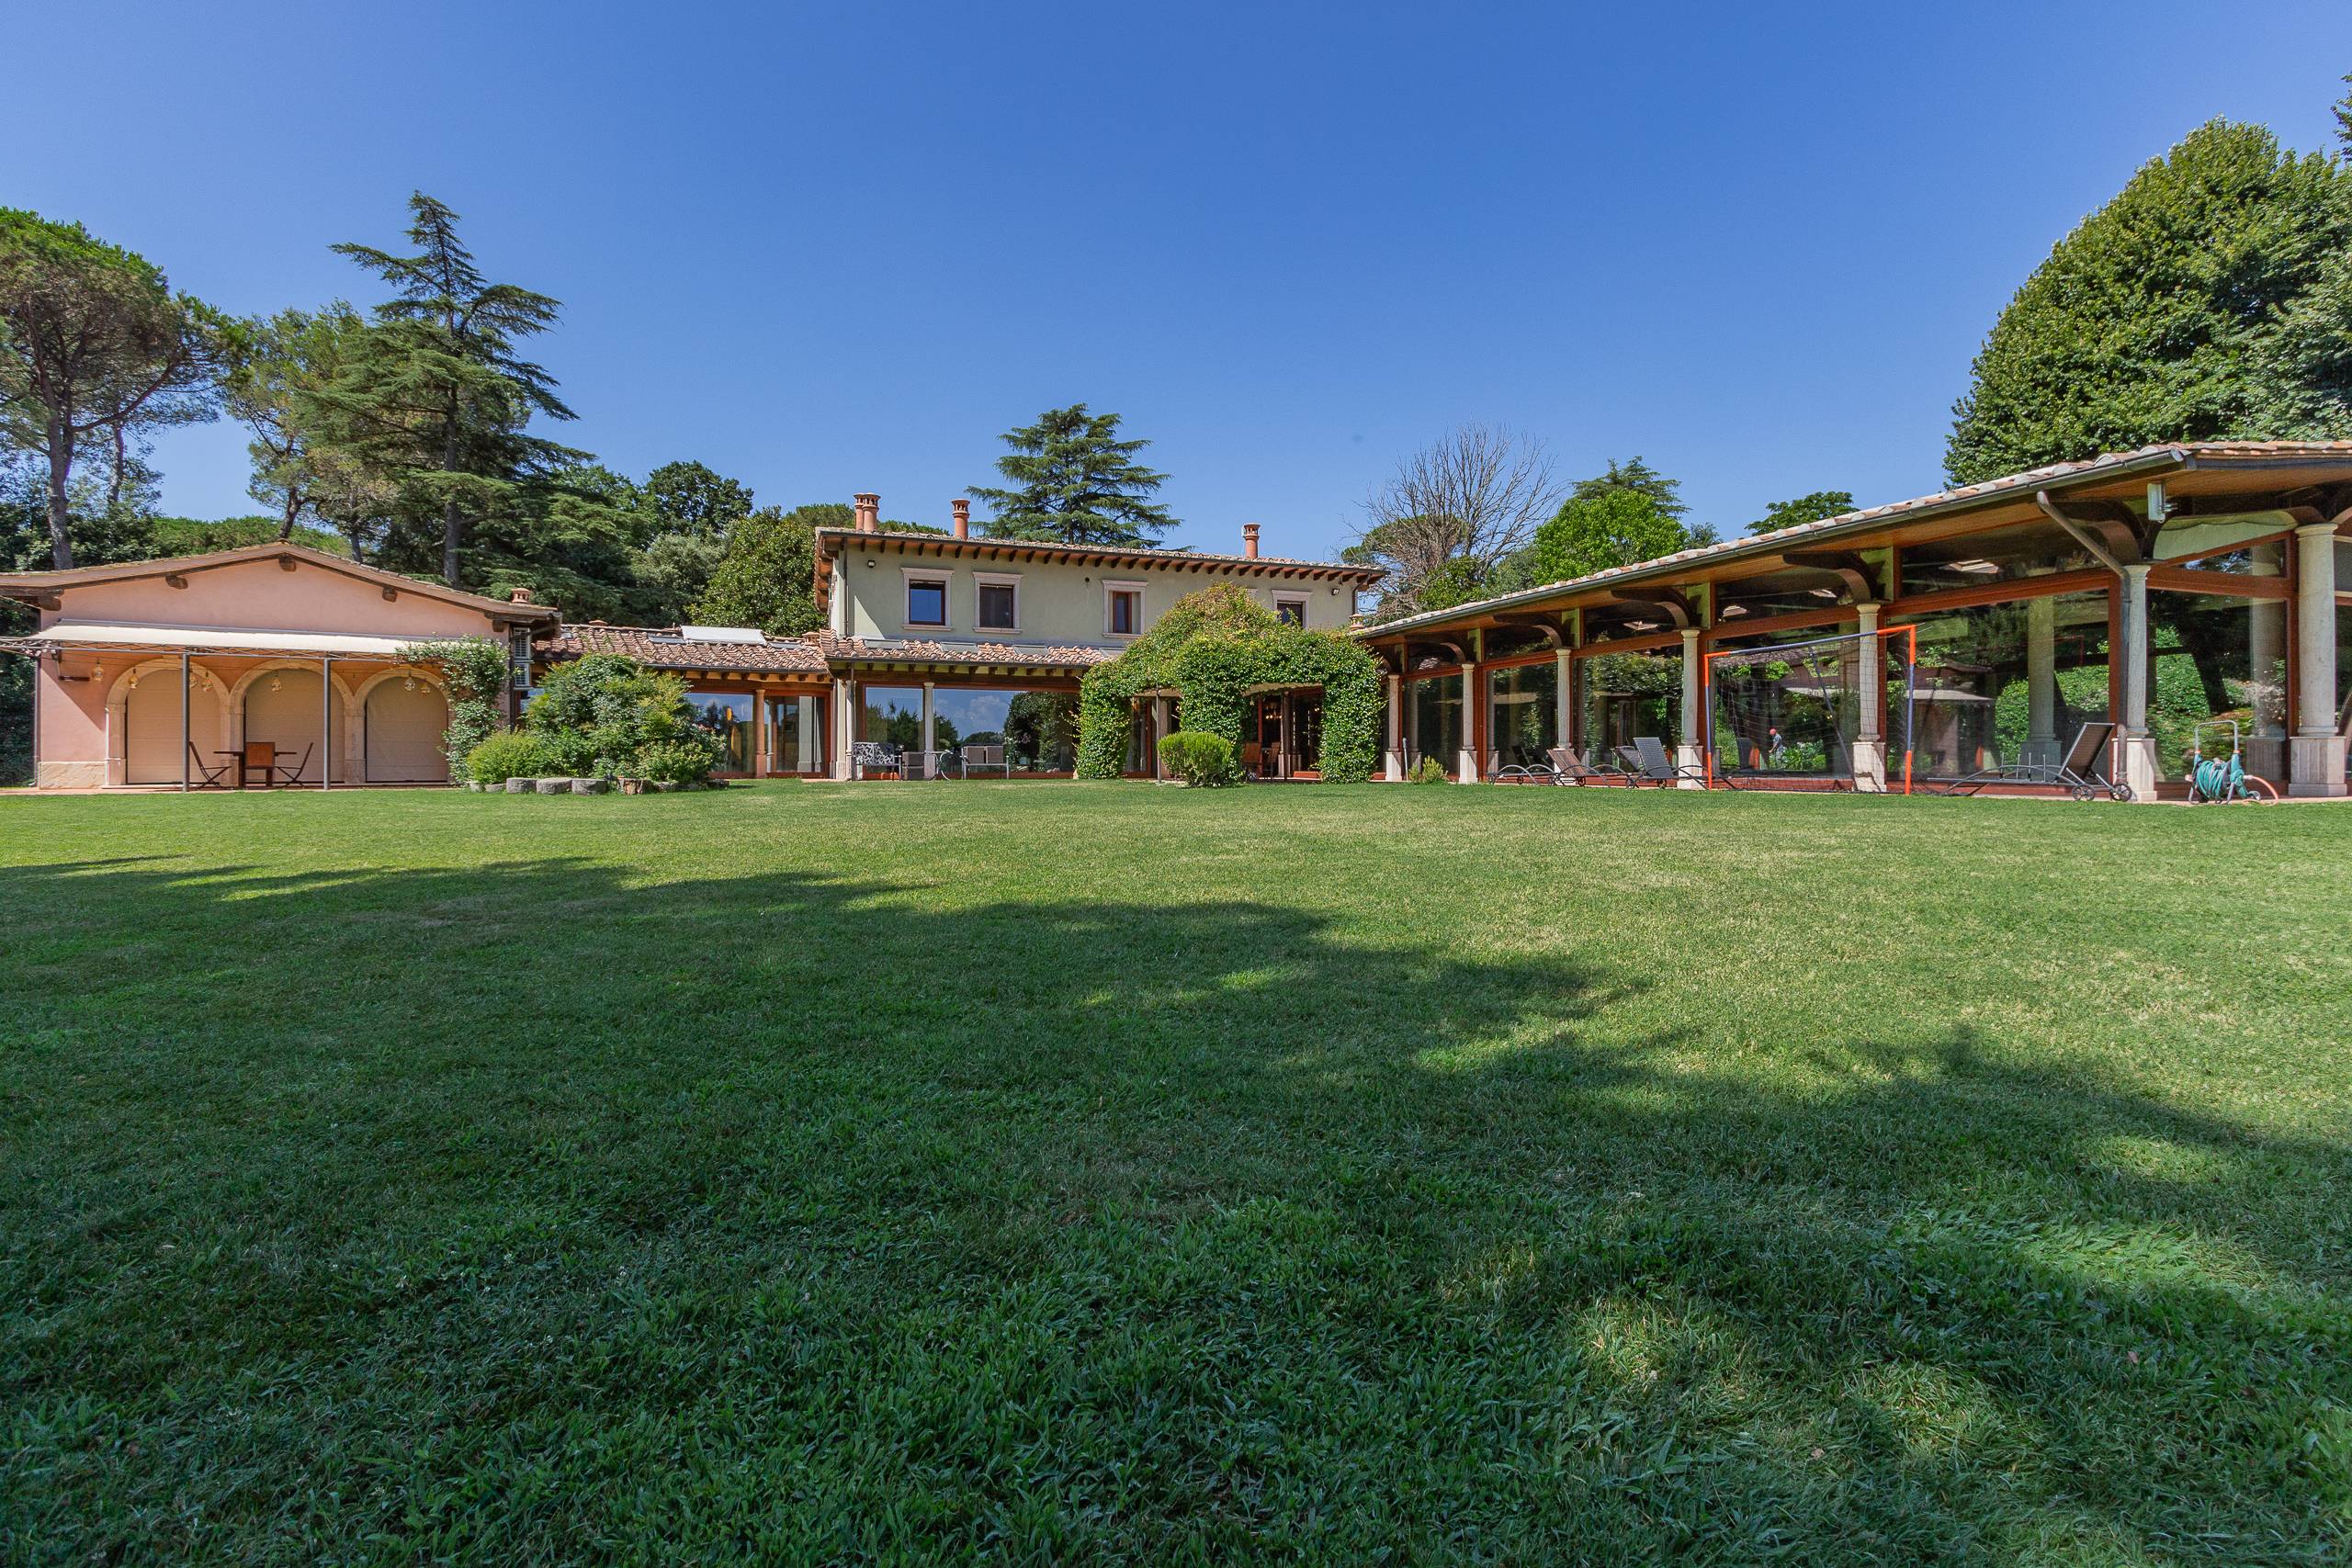 Villa with stunning view of the the Olgiata Golf Course in Rome